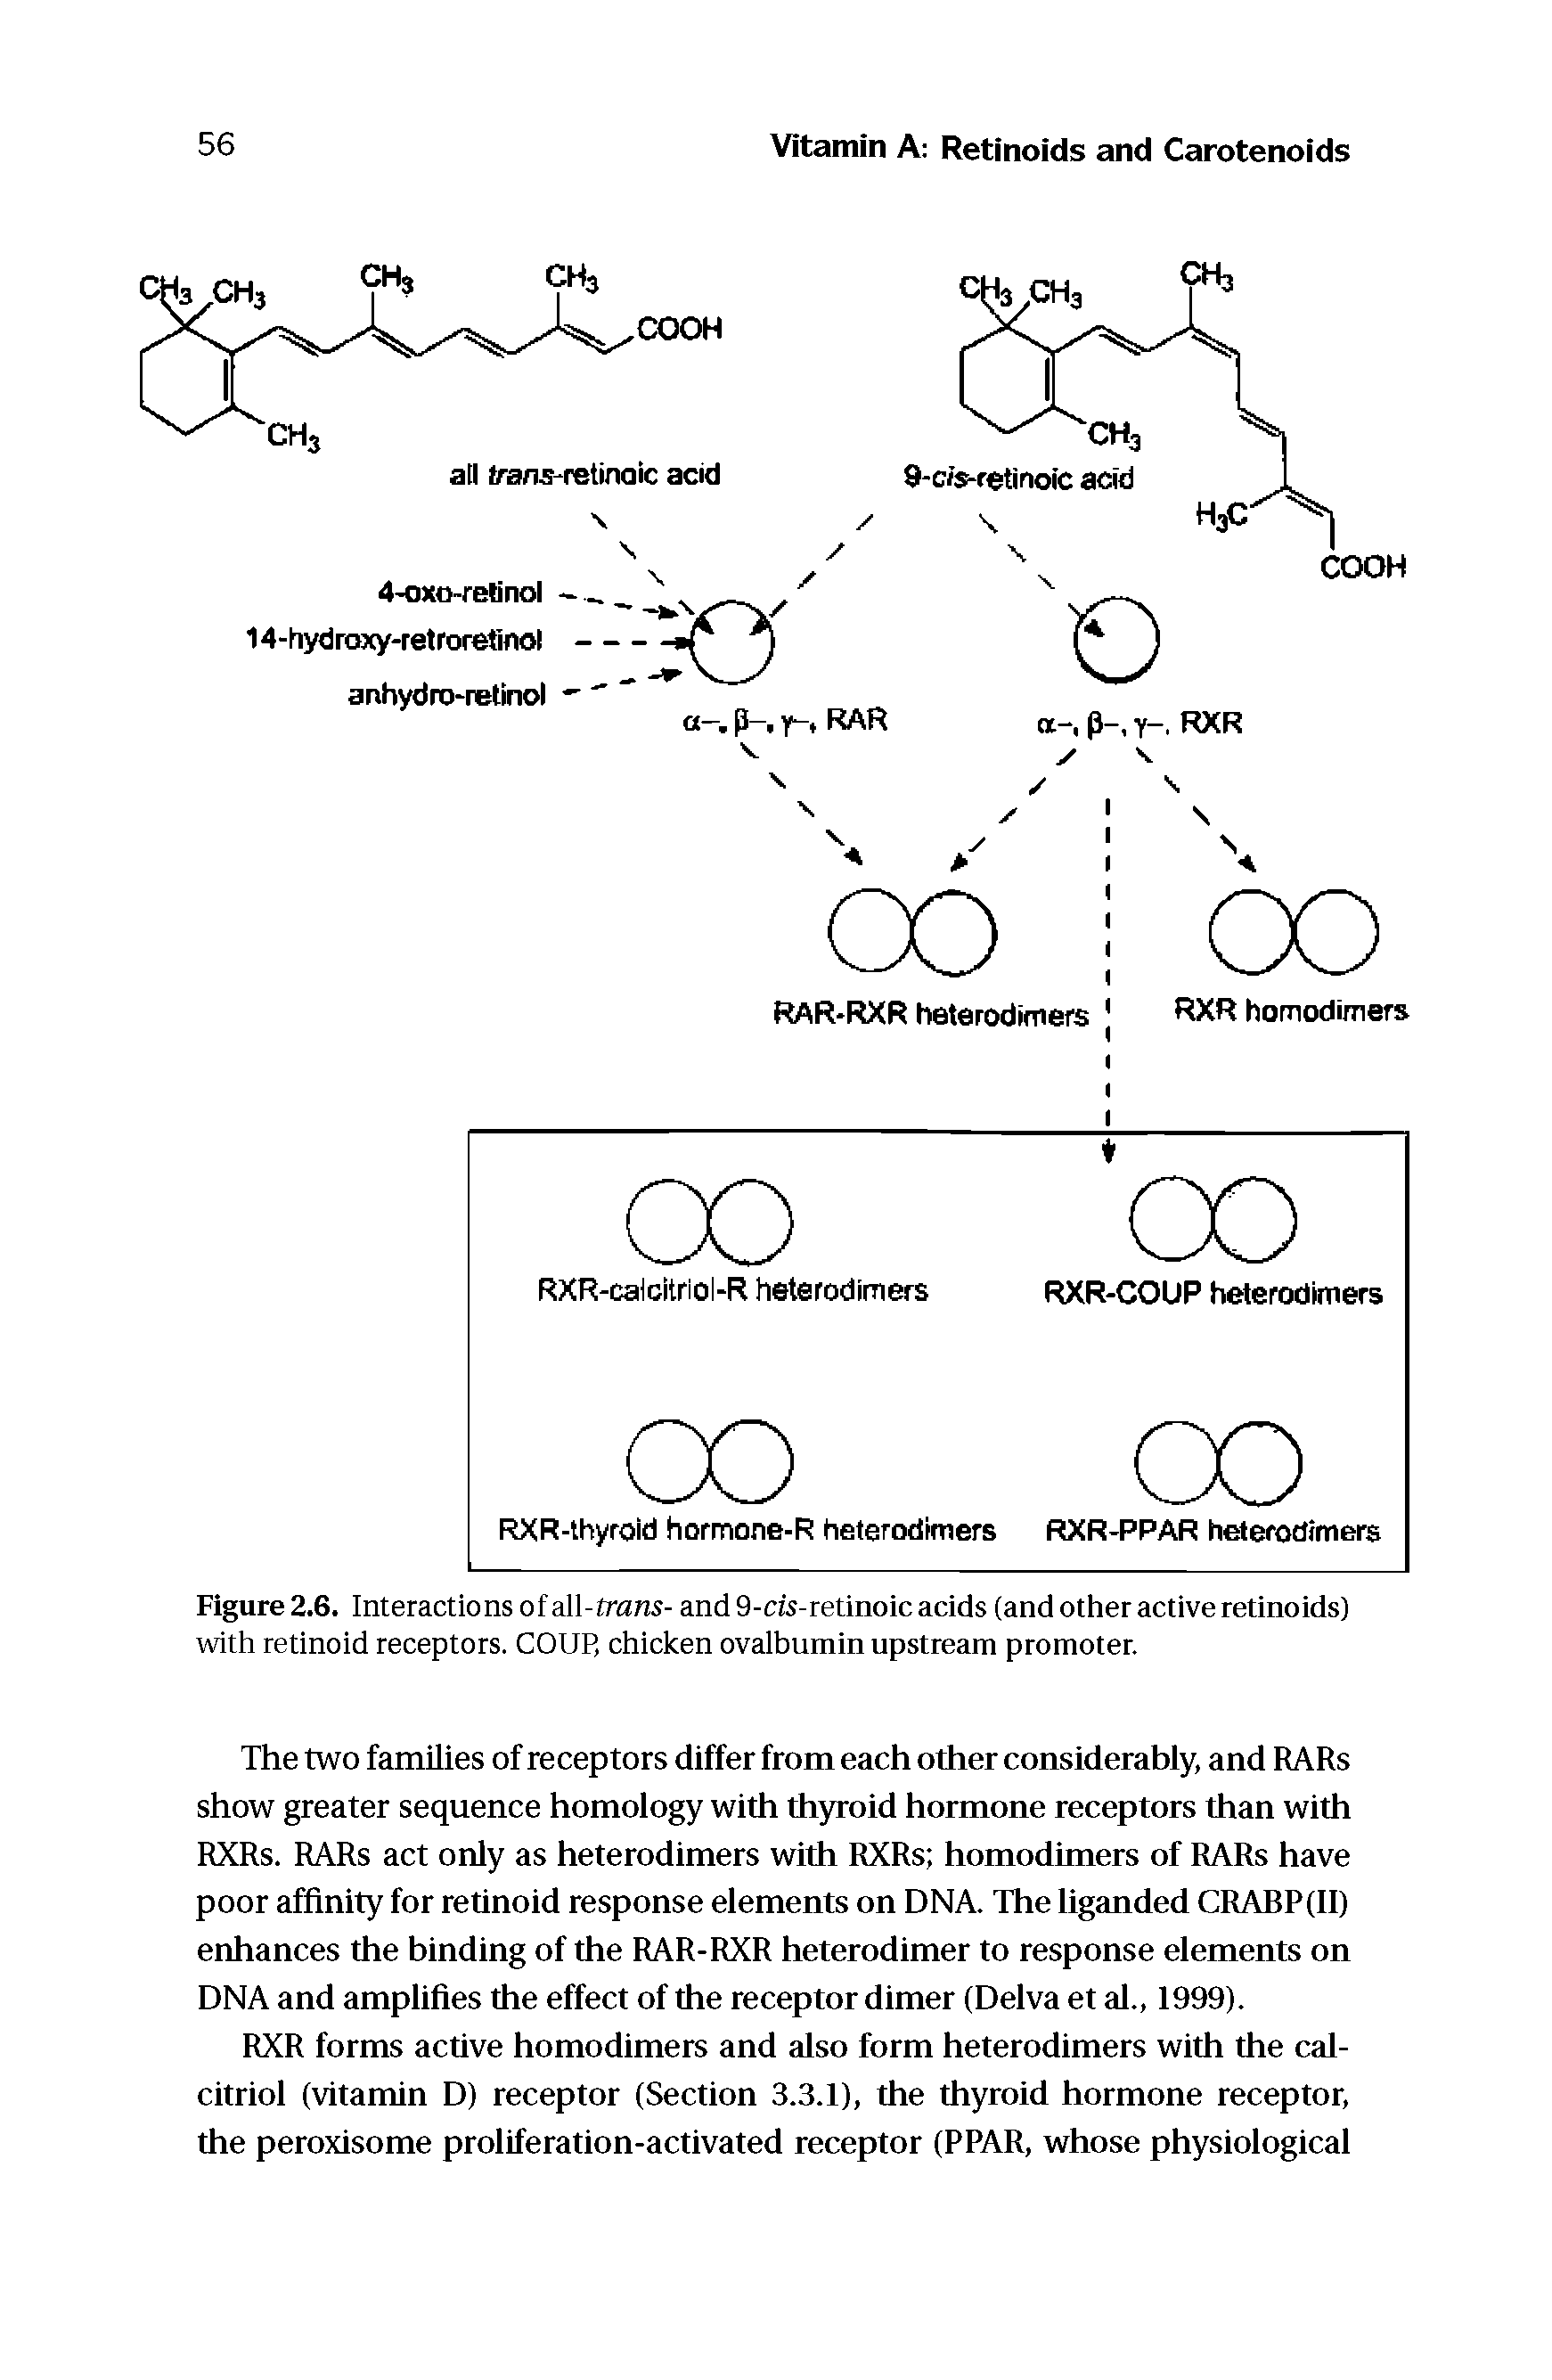 Figure 2.6. Interactions of all-trans- and 9-cis-retinoic acids (and other active retinoids) with retinoid receptors. COUP, chicken ovaibumin upstream promoter.